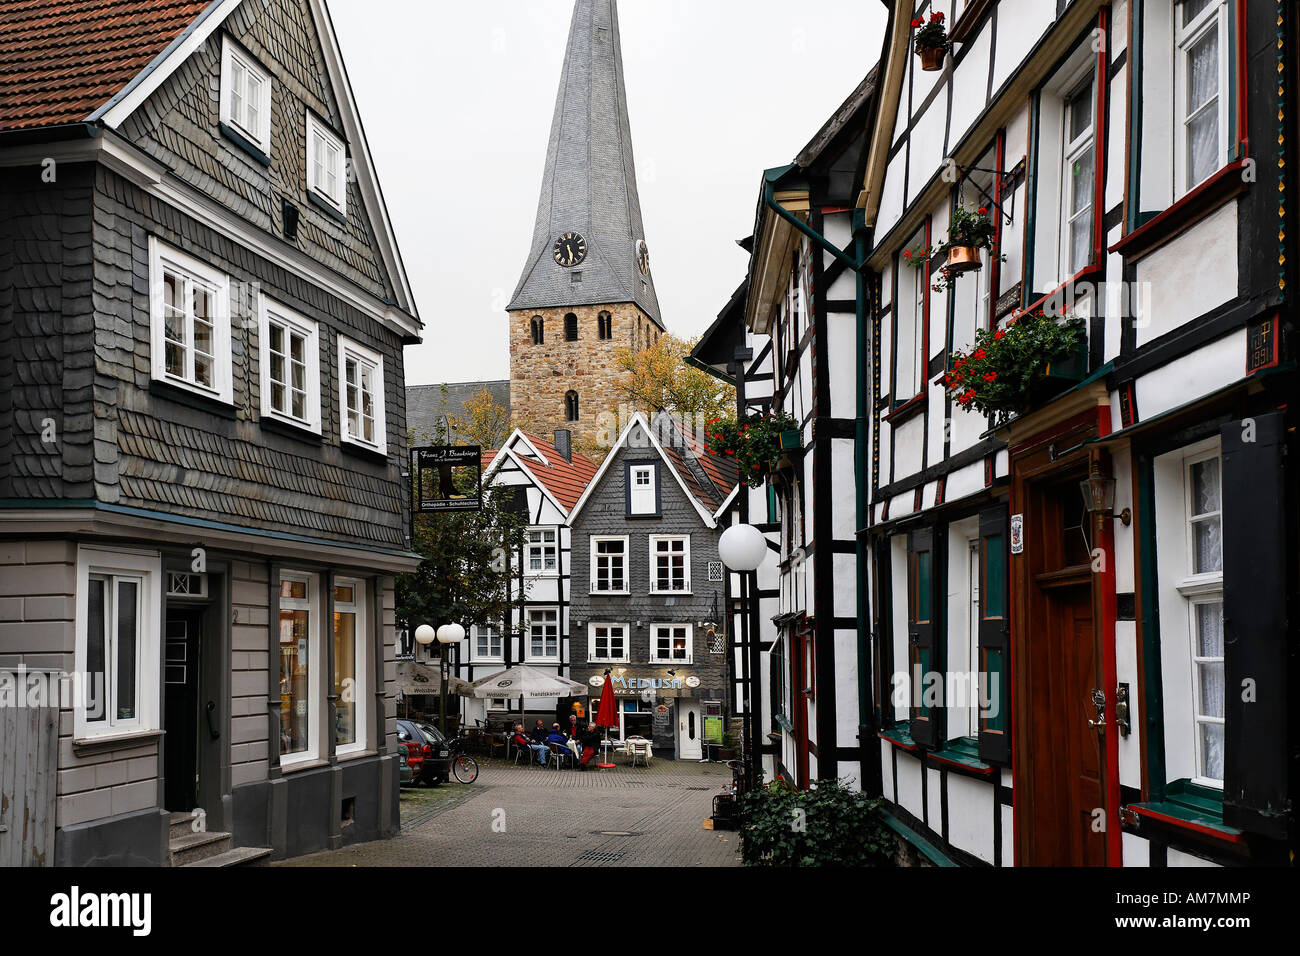 Half-timbering houses at the old part of town, Hattingen, NRW, Germany Stock Photo